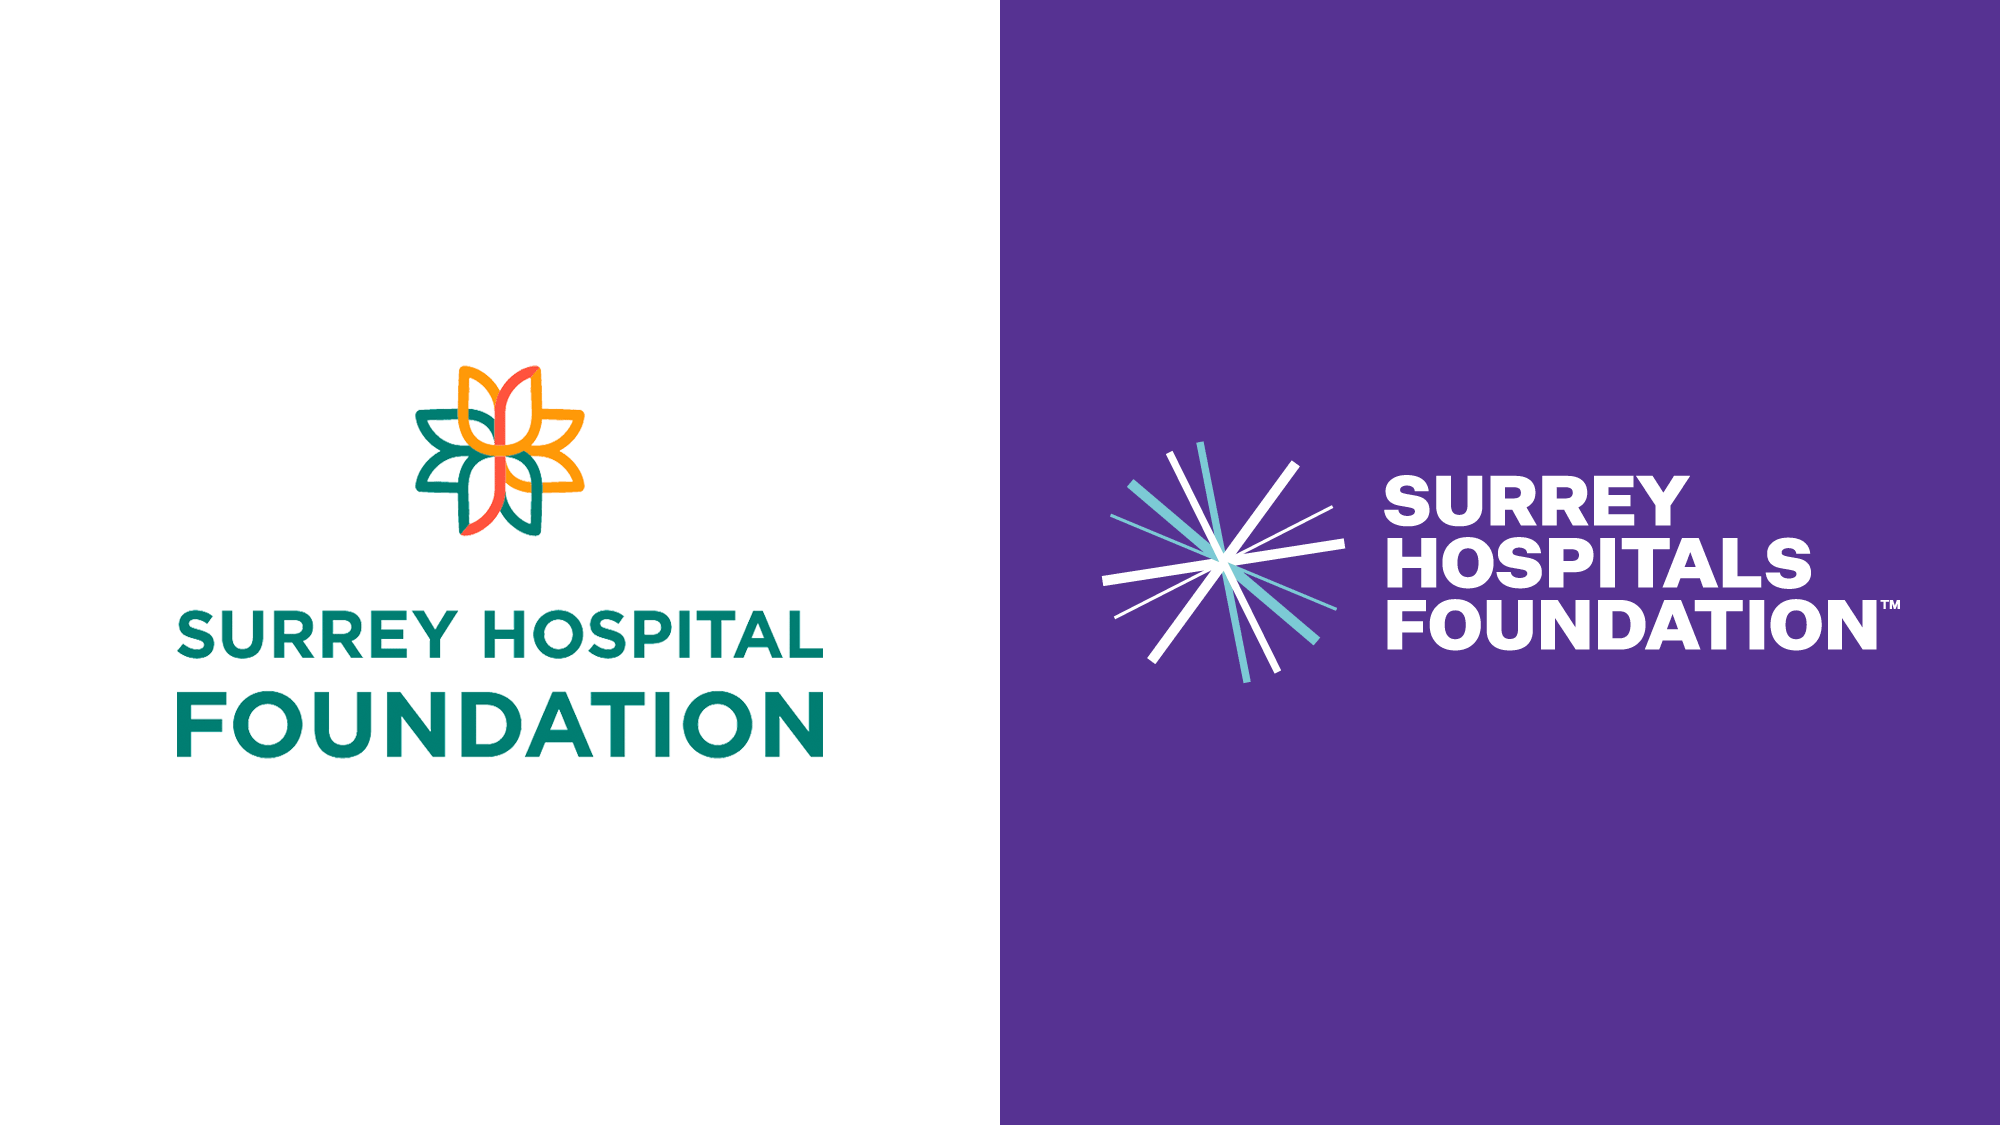 Brand New: New Logo and Identity for Surrey Hospitals Foundation by